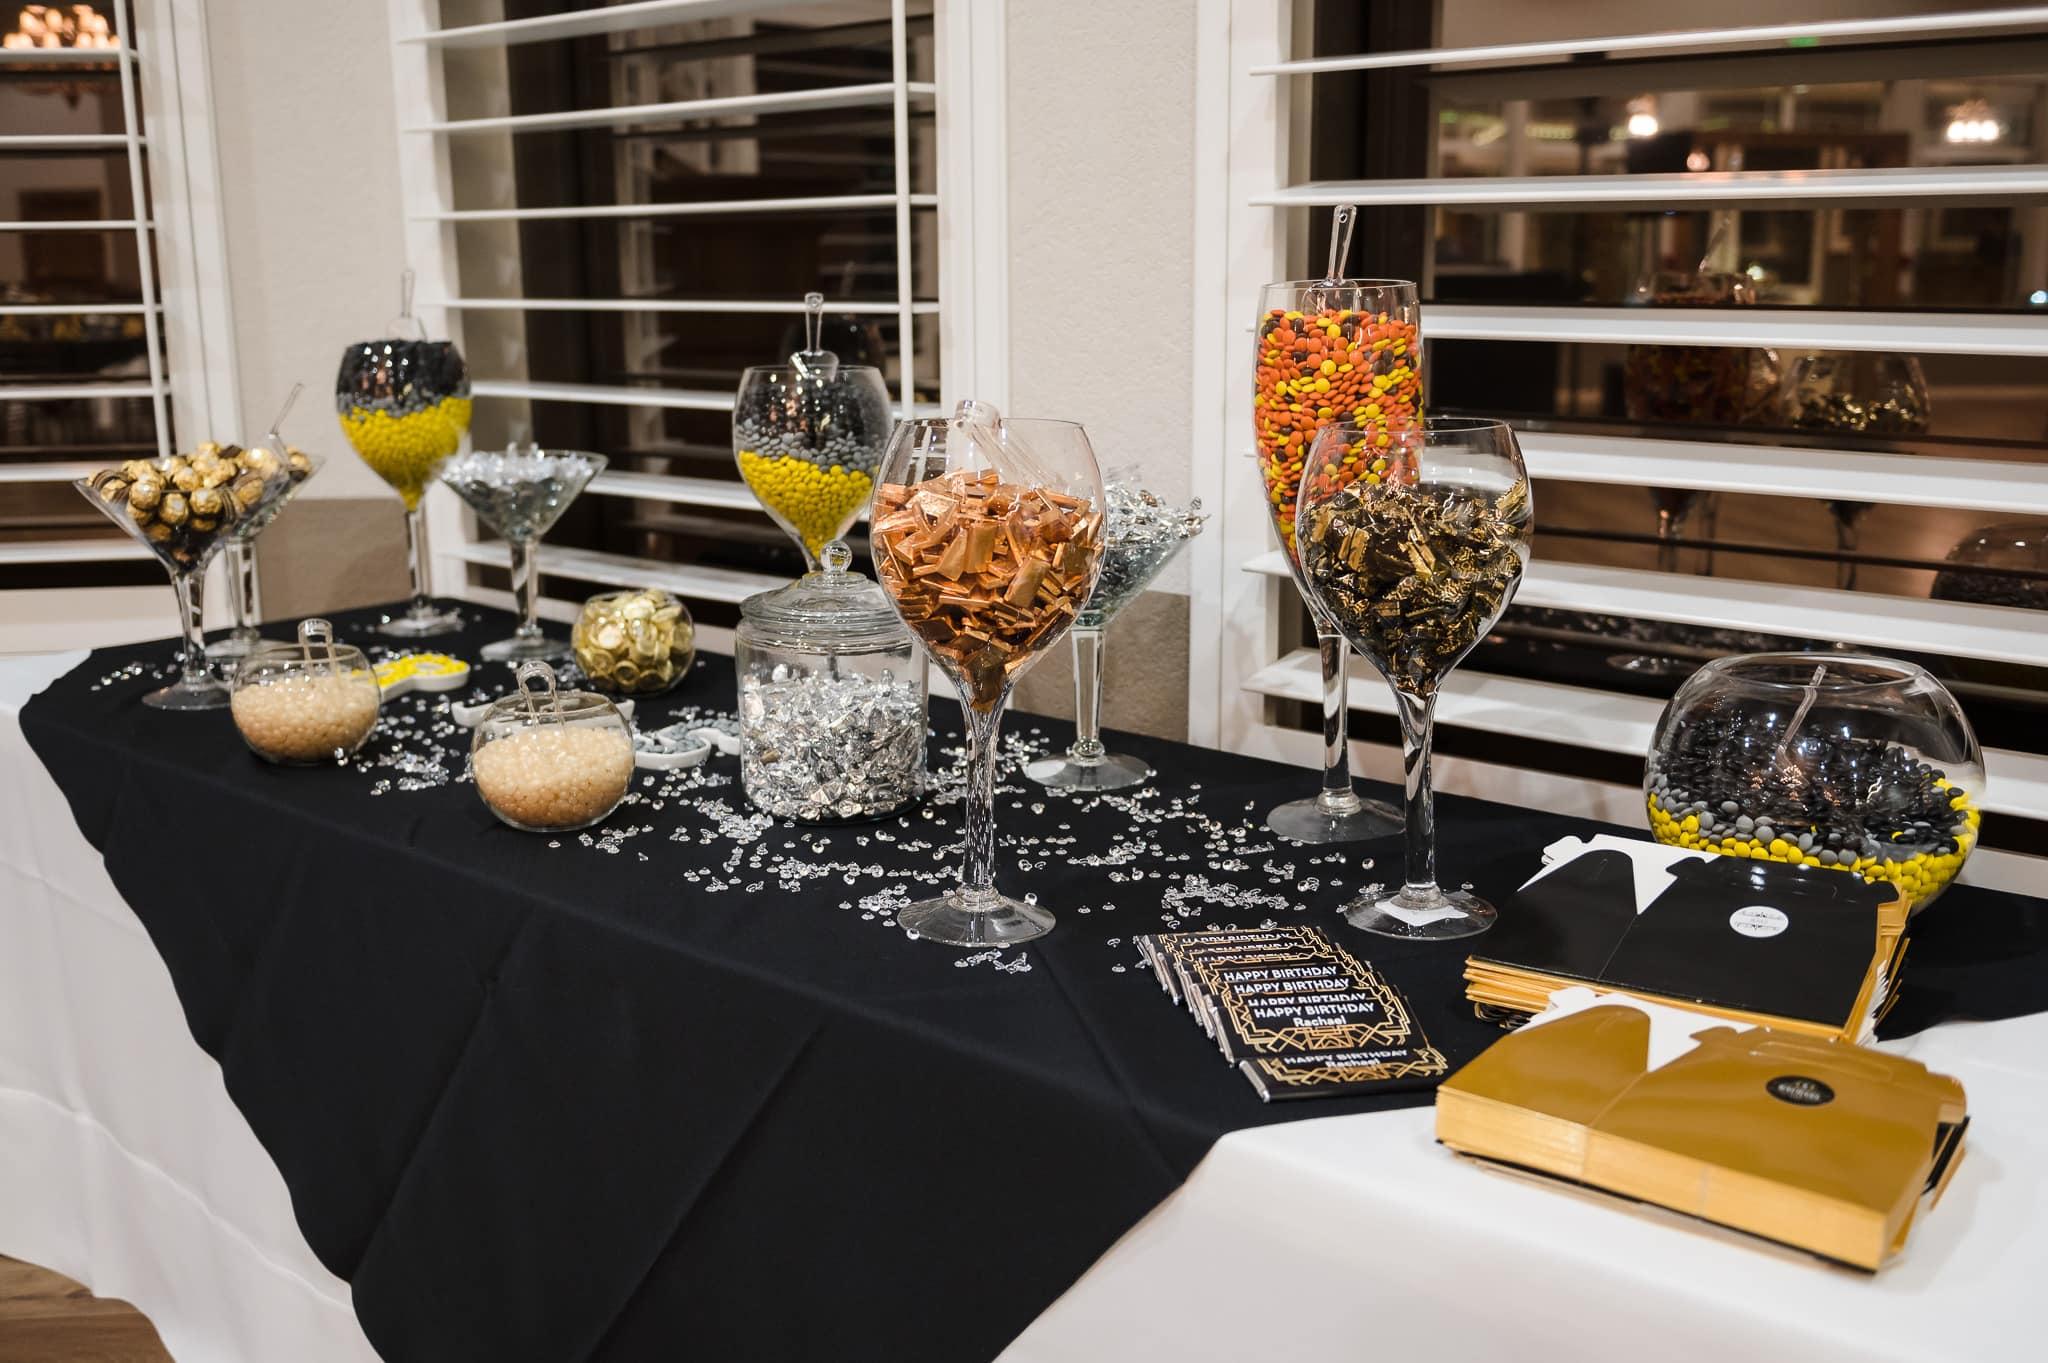 Plentiful amounts of clear glass candy jars in gold and black on a table ready for guests at a 40th birthday Great-Gatsby themed surprise party.